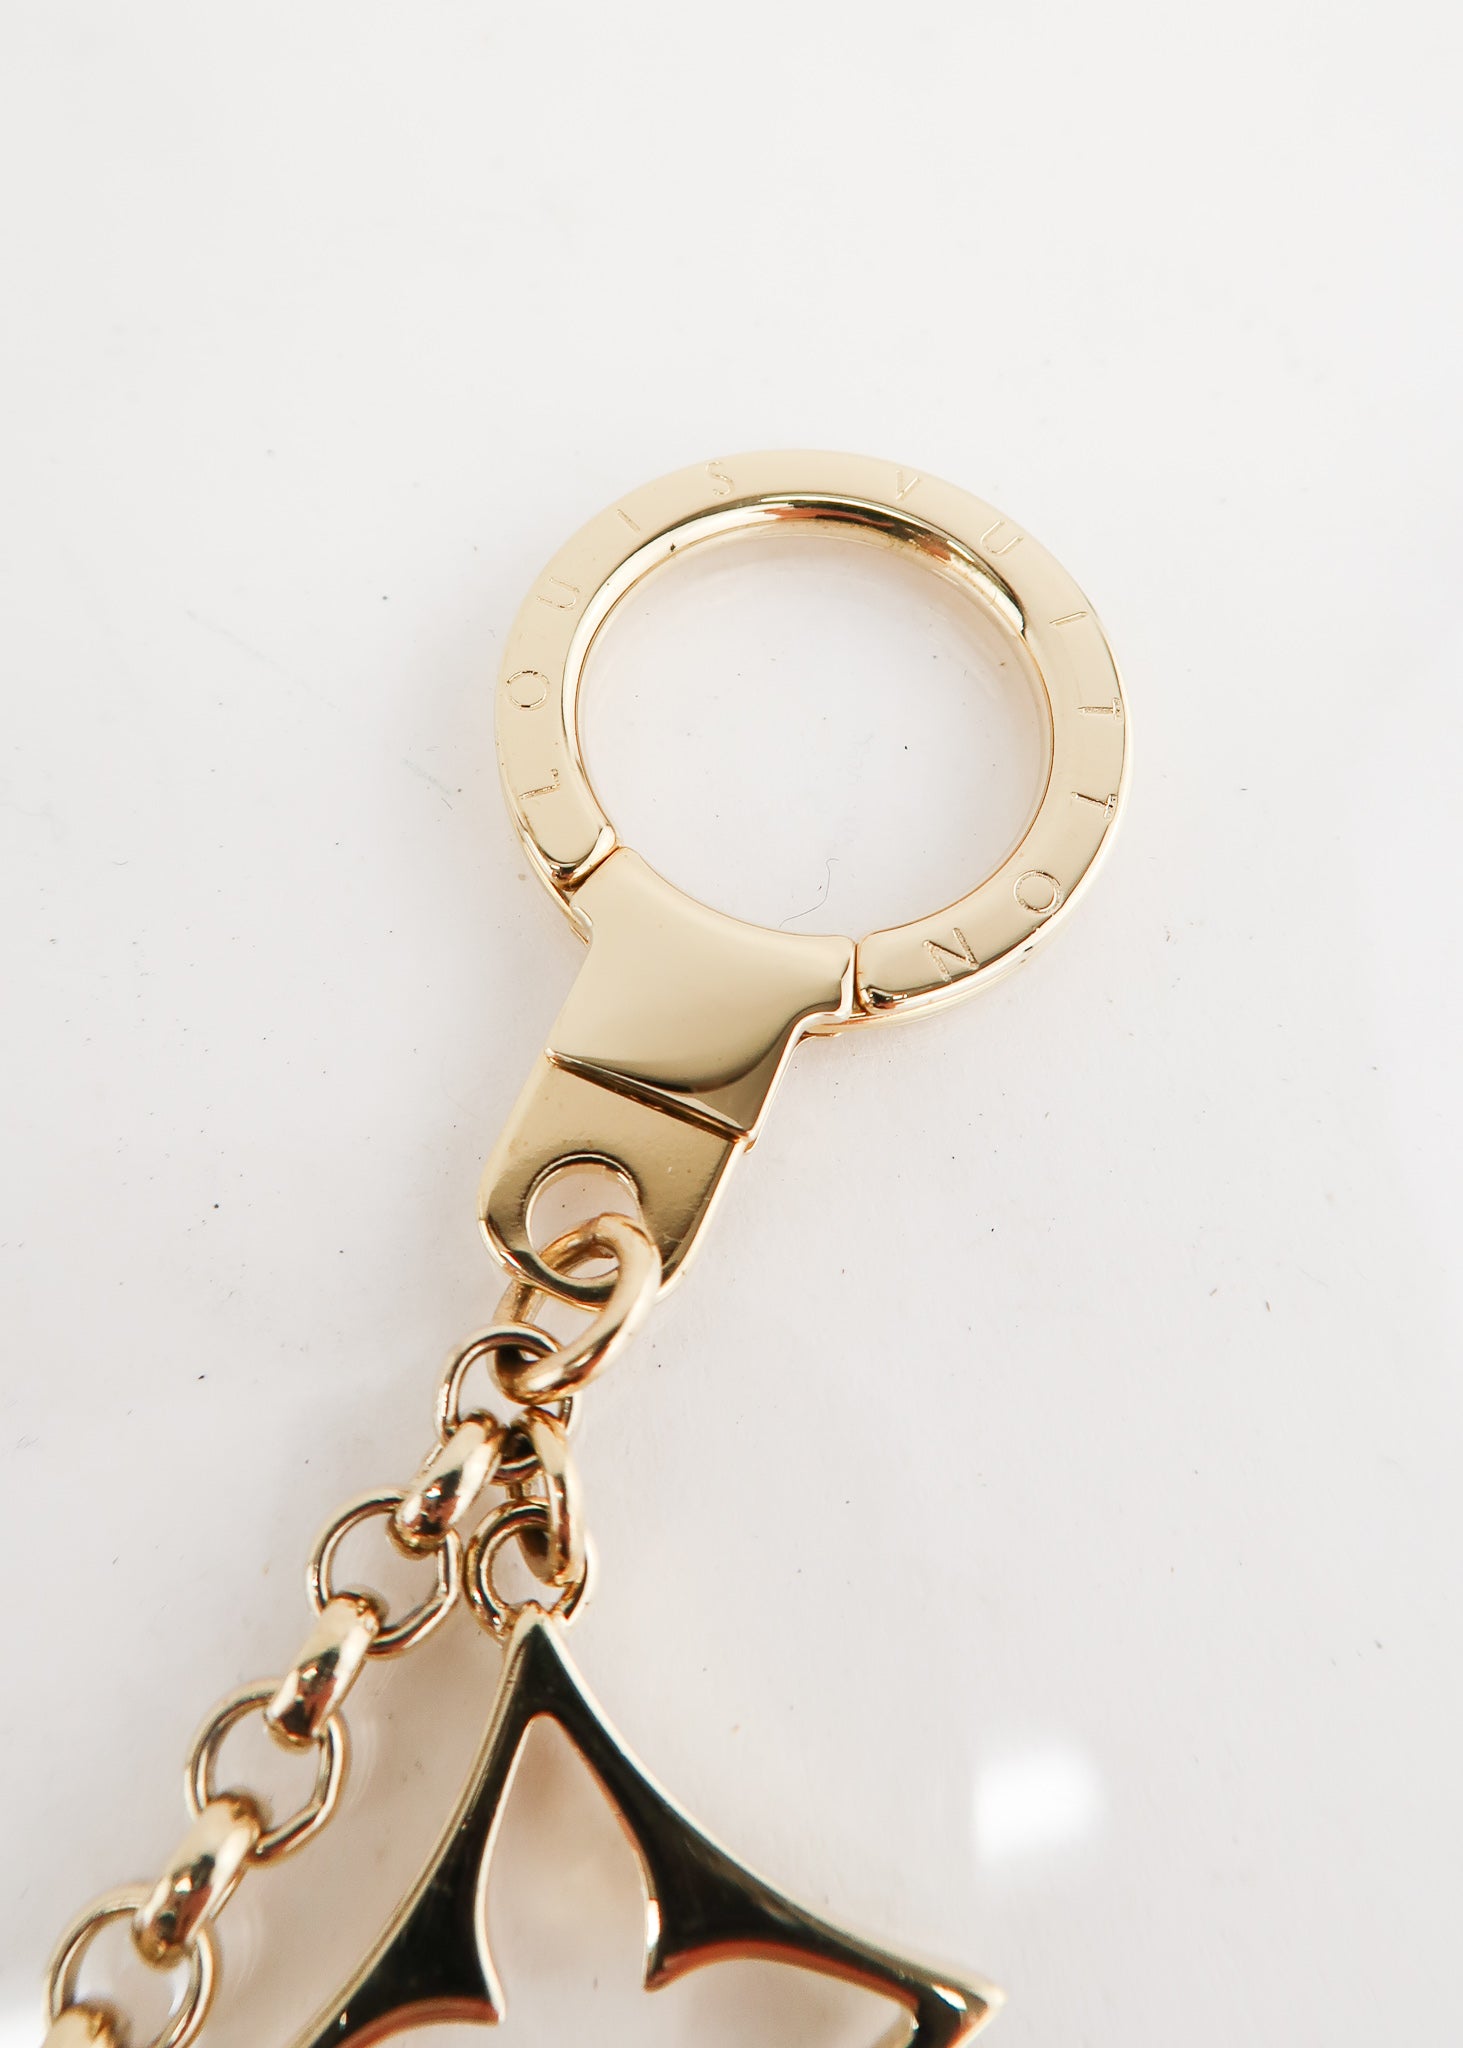 Louis Vuitton Puzzle Key Ring and Bag Charm